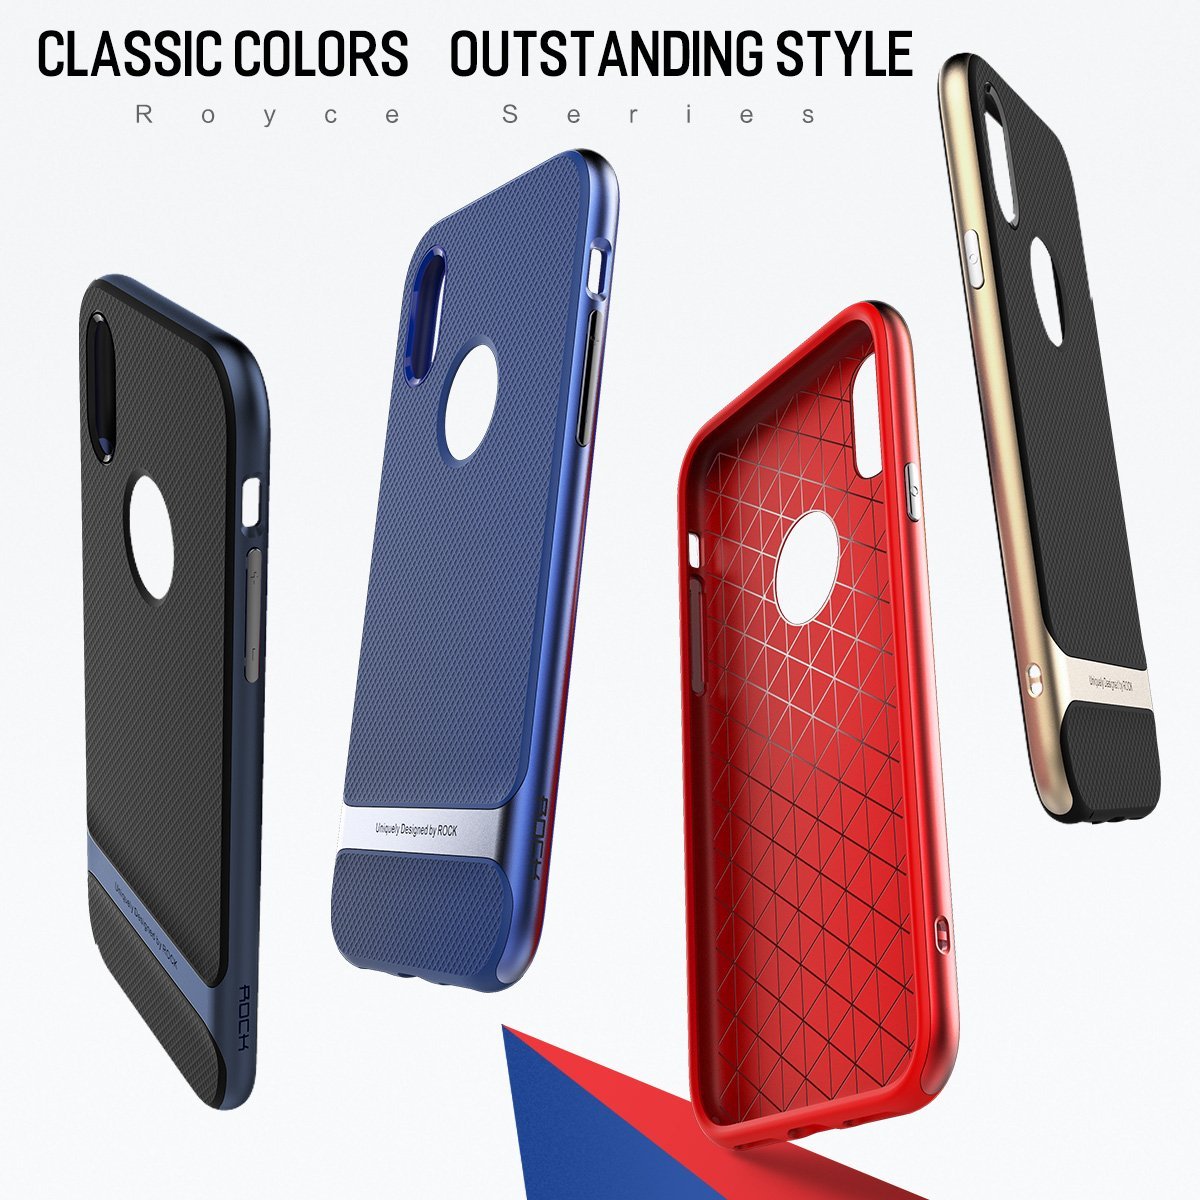 Royce Series By Rock Dual Layer Thin &amp; Slim Shockproof Case for iPhone X - Red